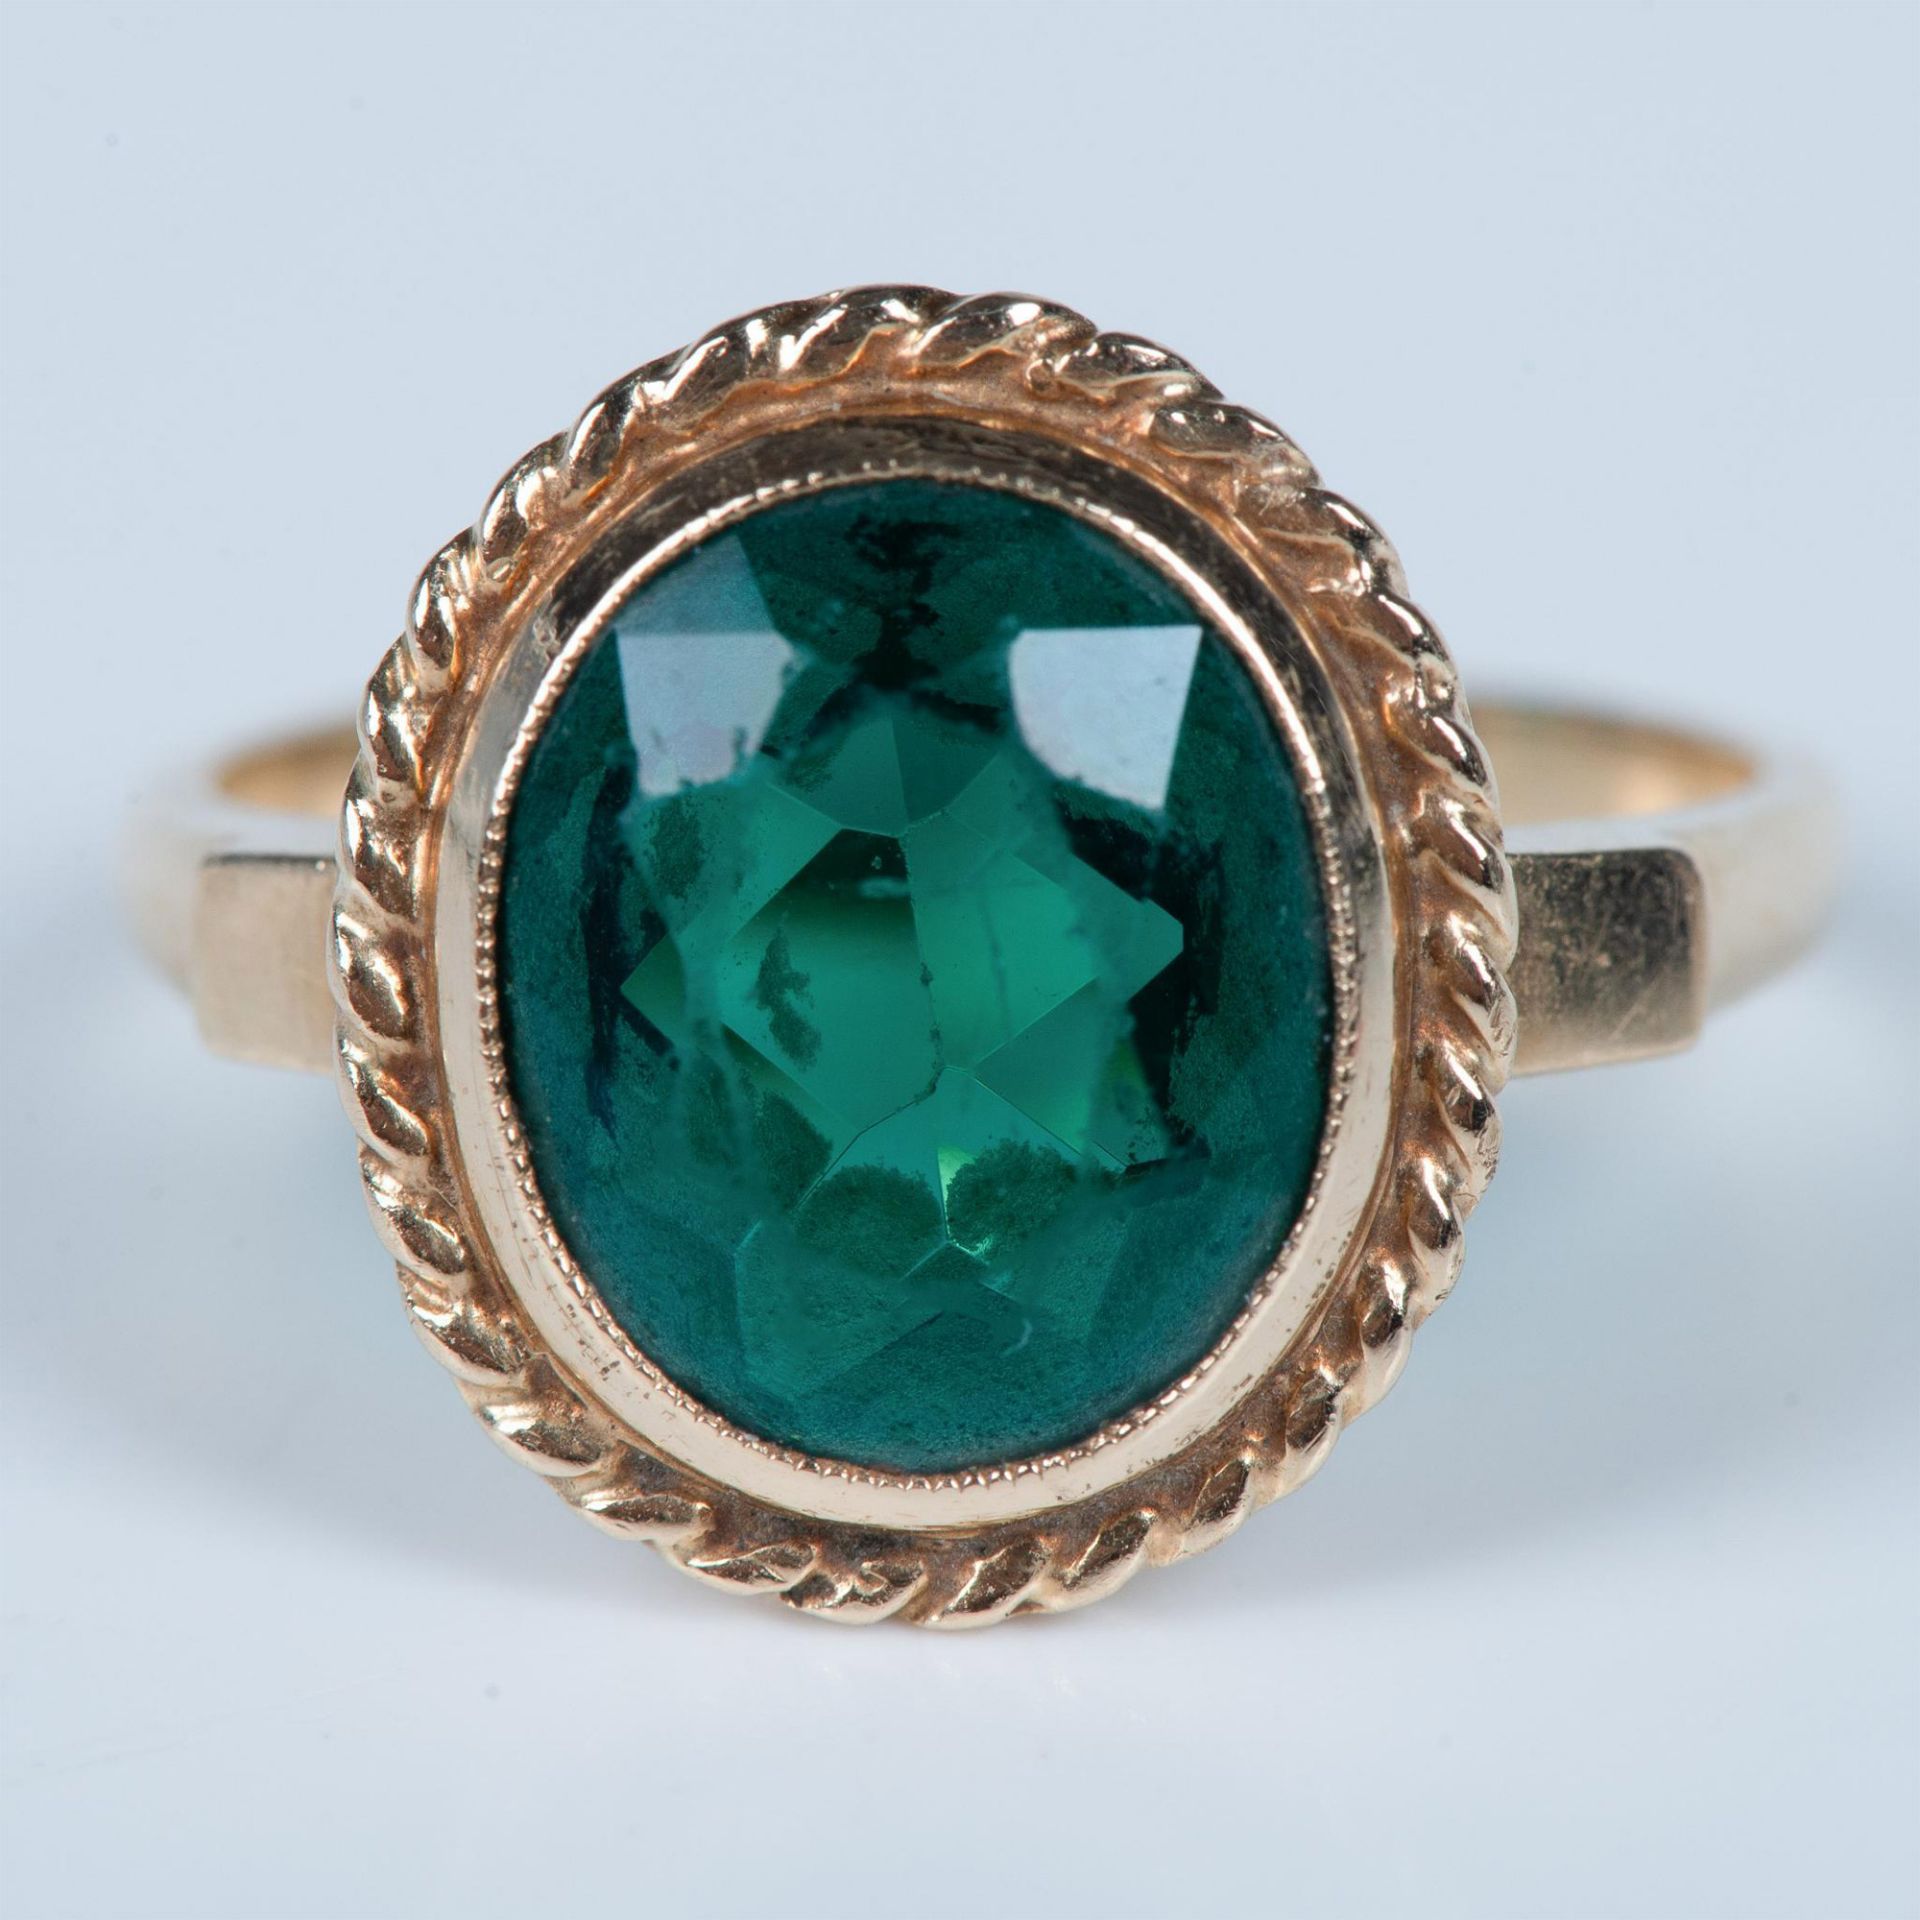 Gold Ring with Large Green Stone - Image 4 of 6